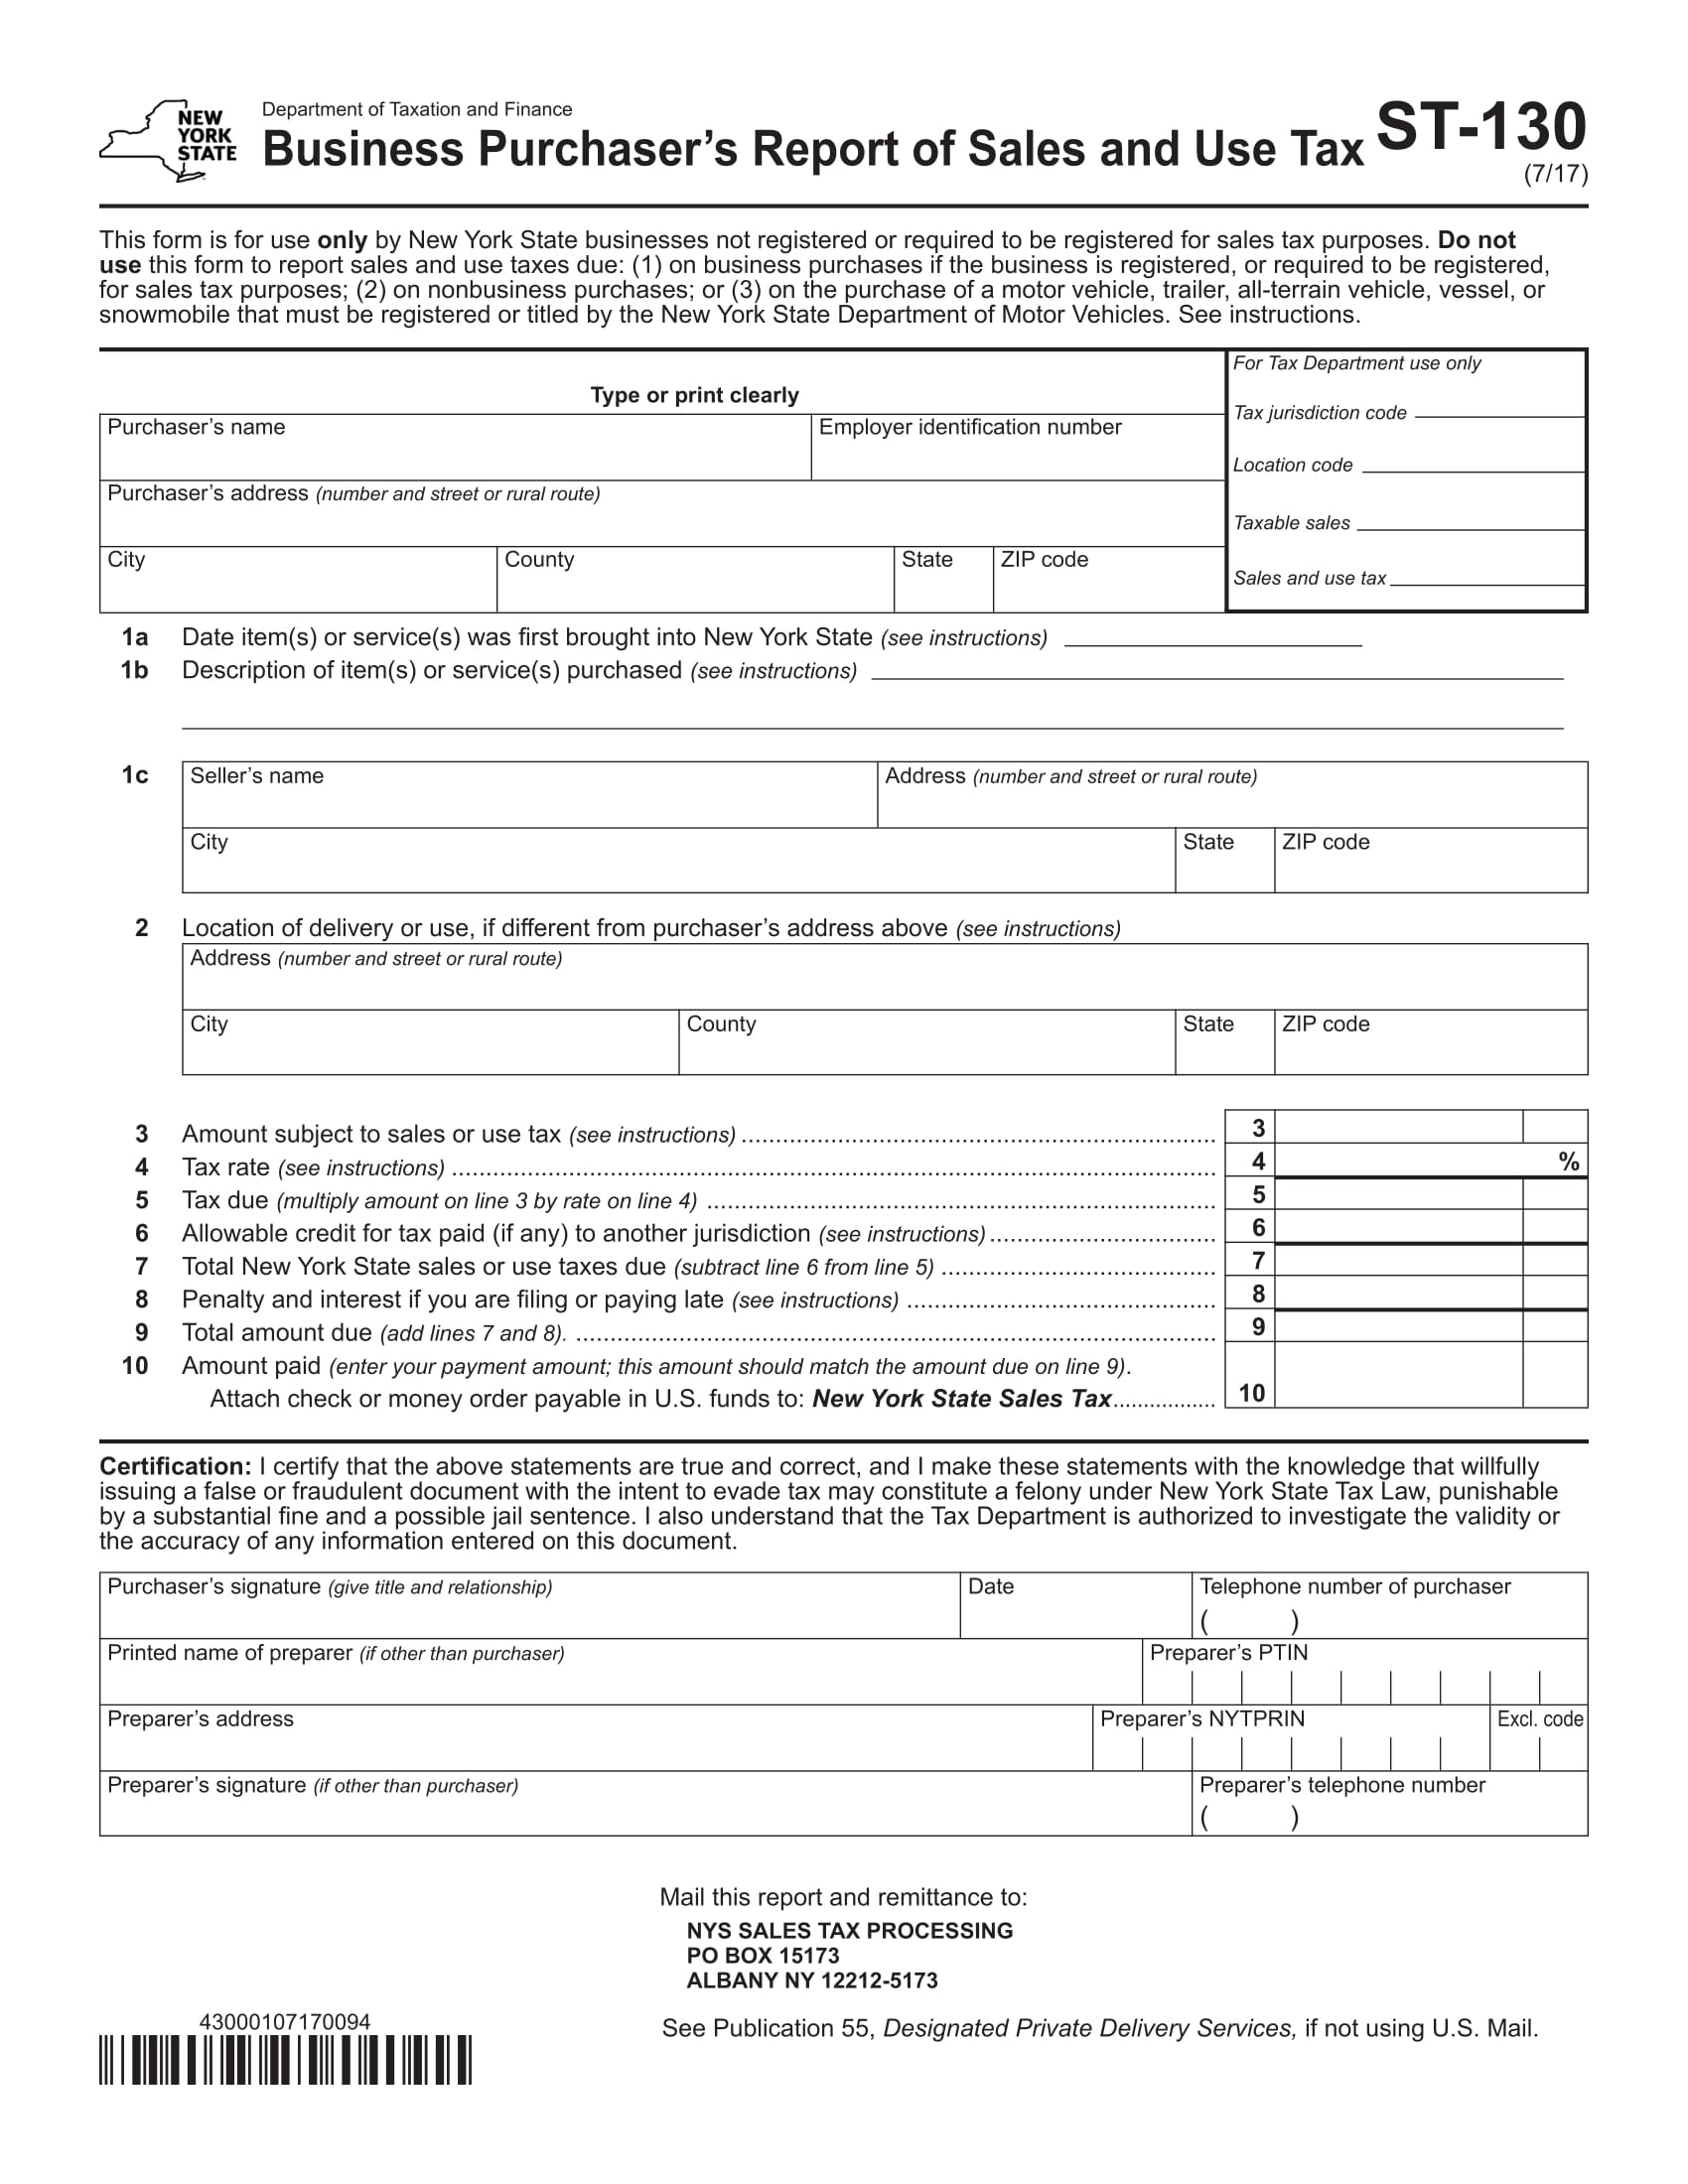 business purchaser’s sales report form 1